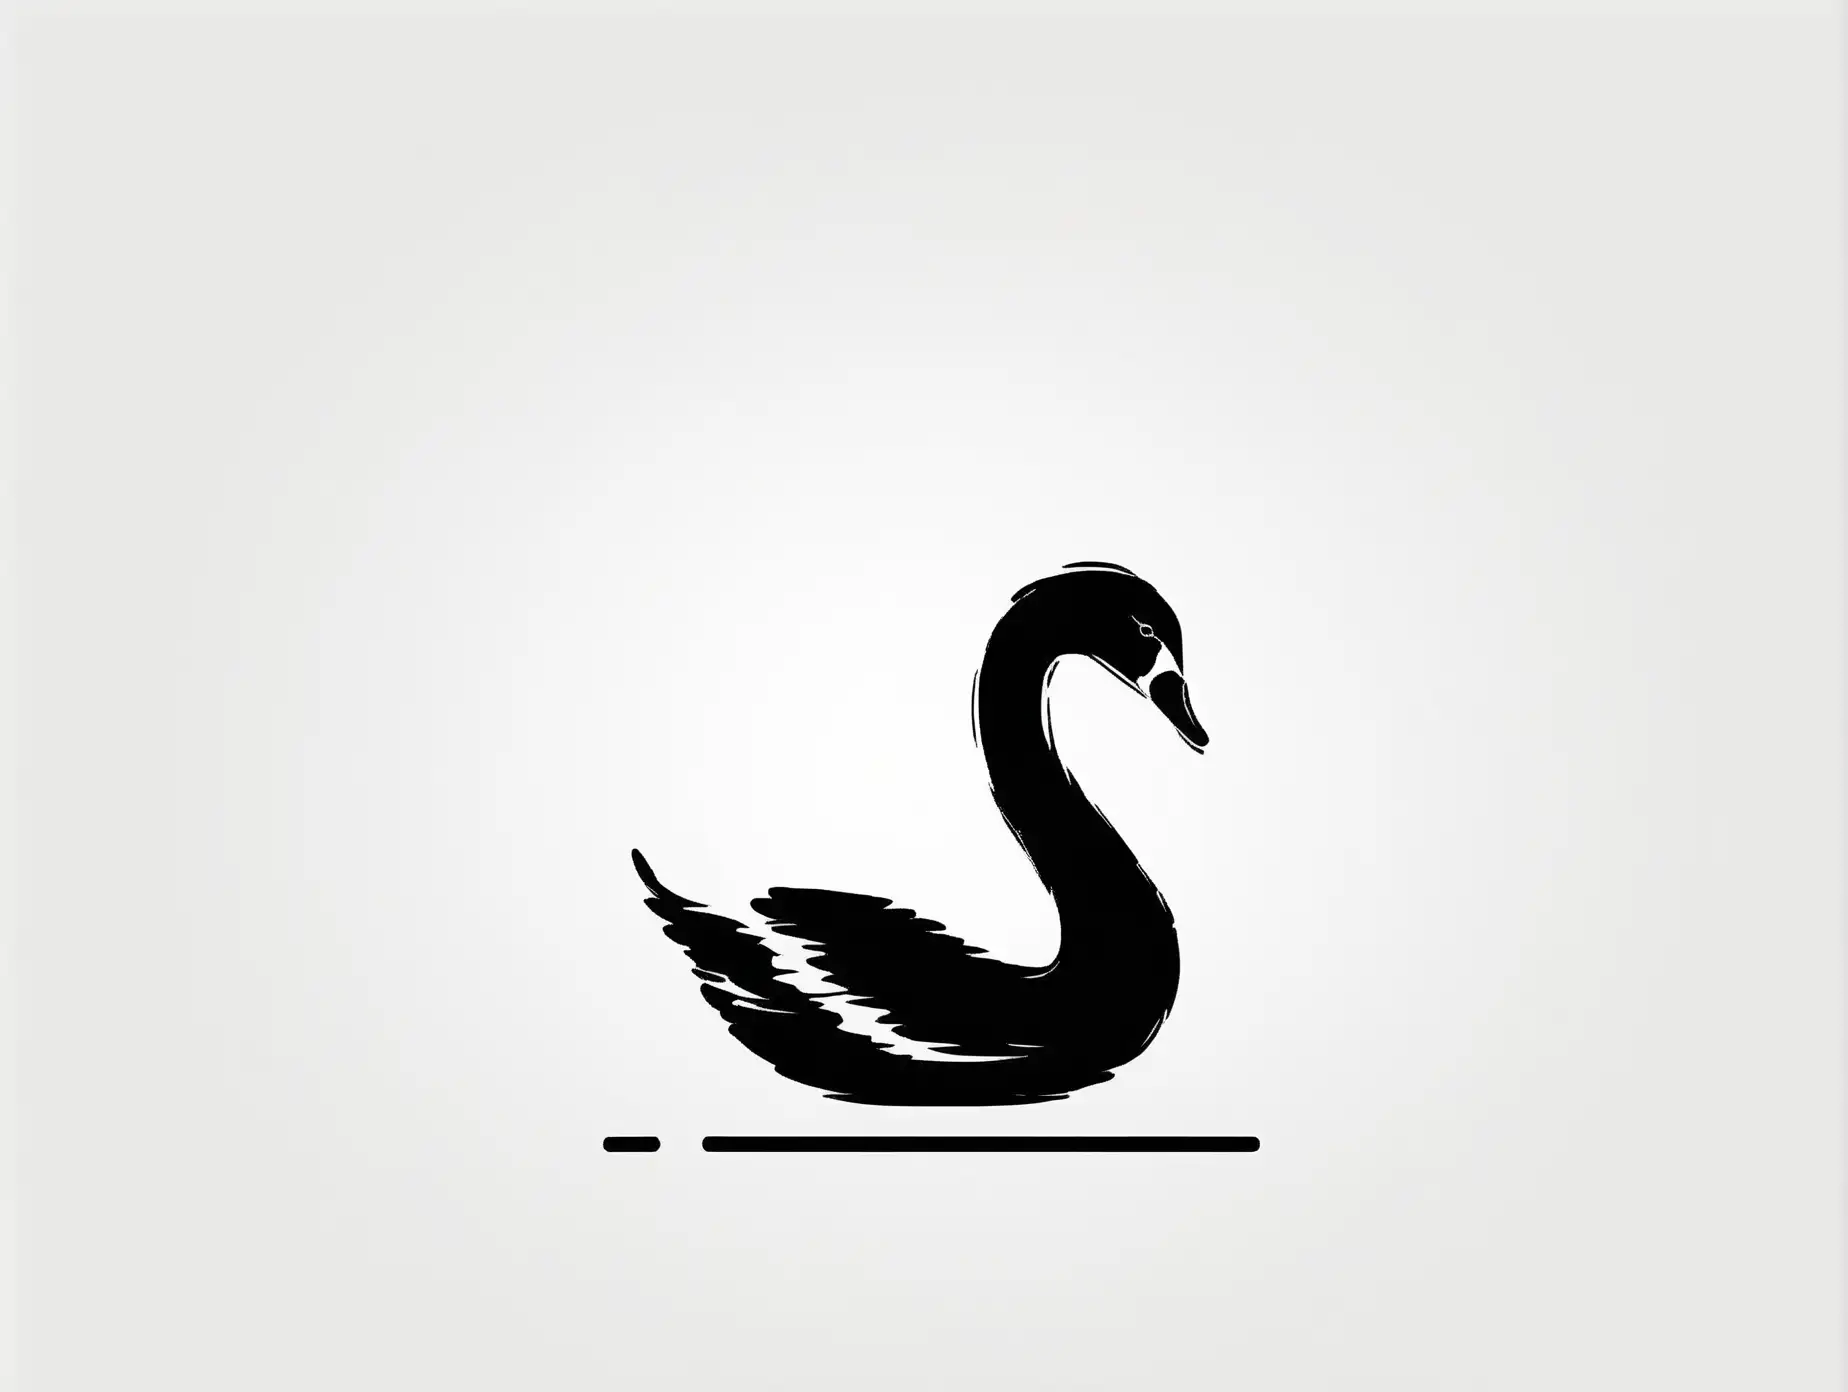 A simple corporate logo of a black swan on a white background